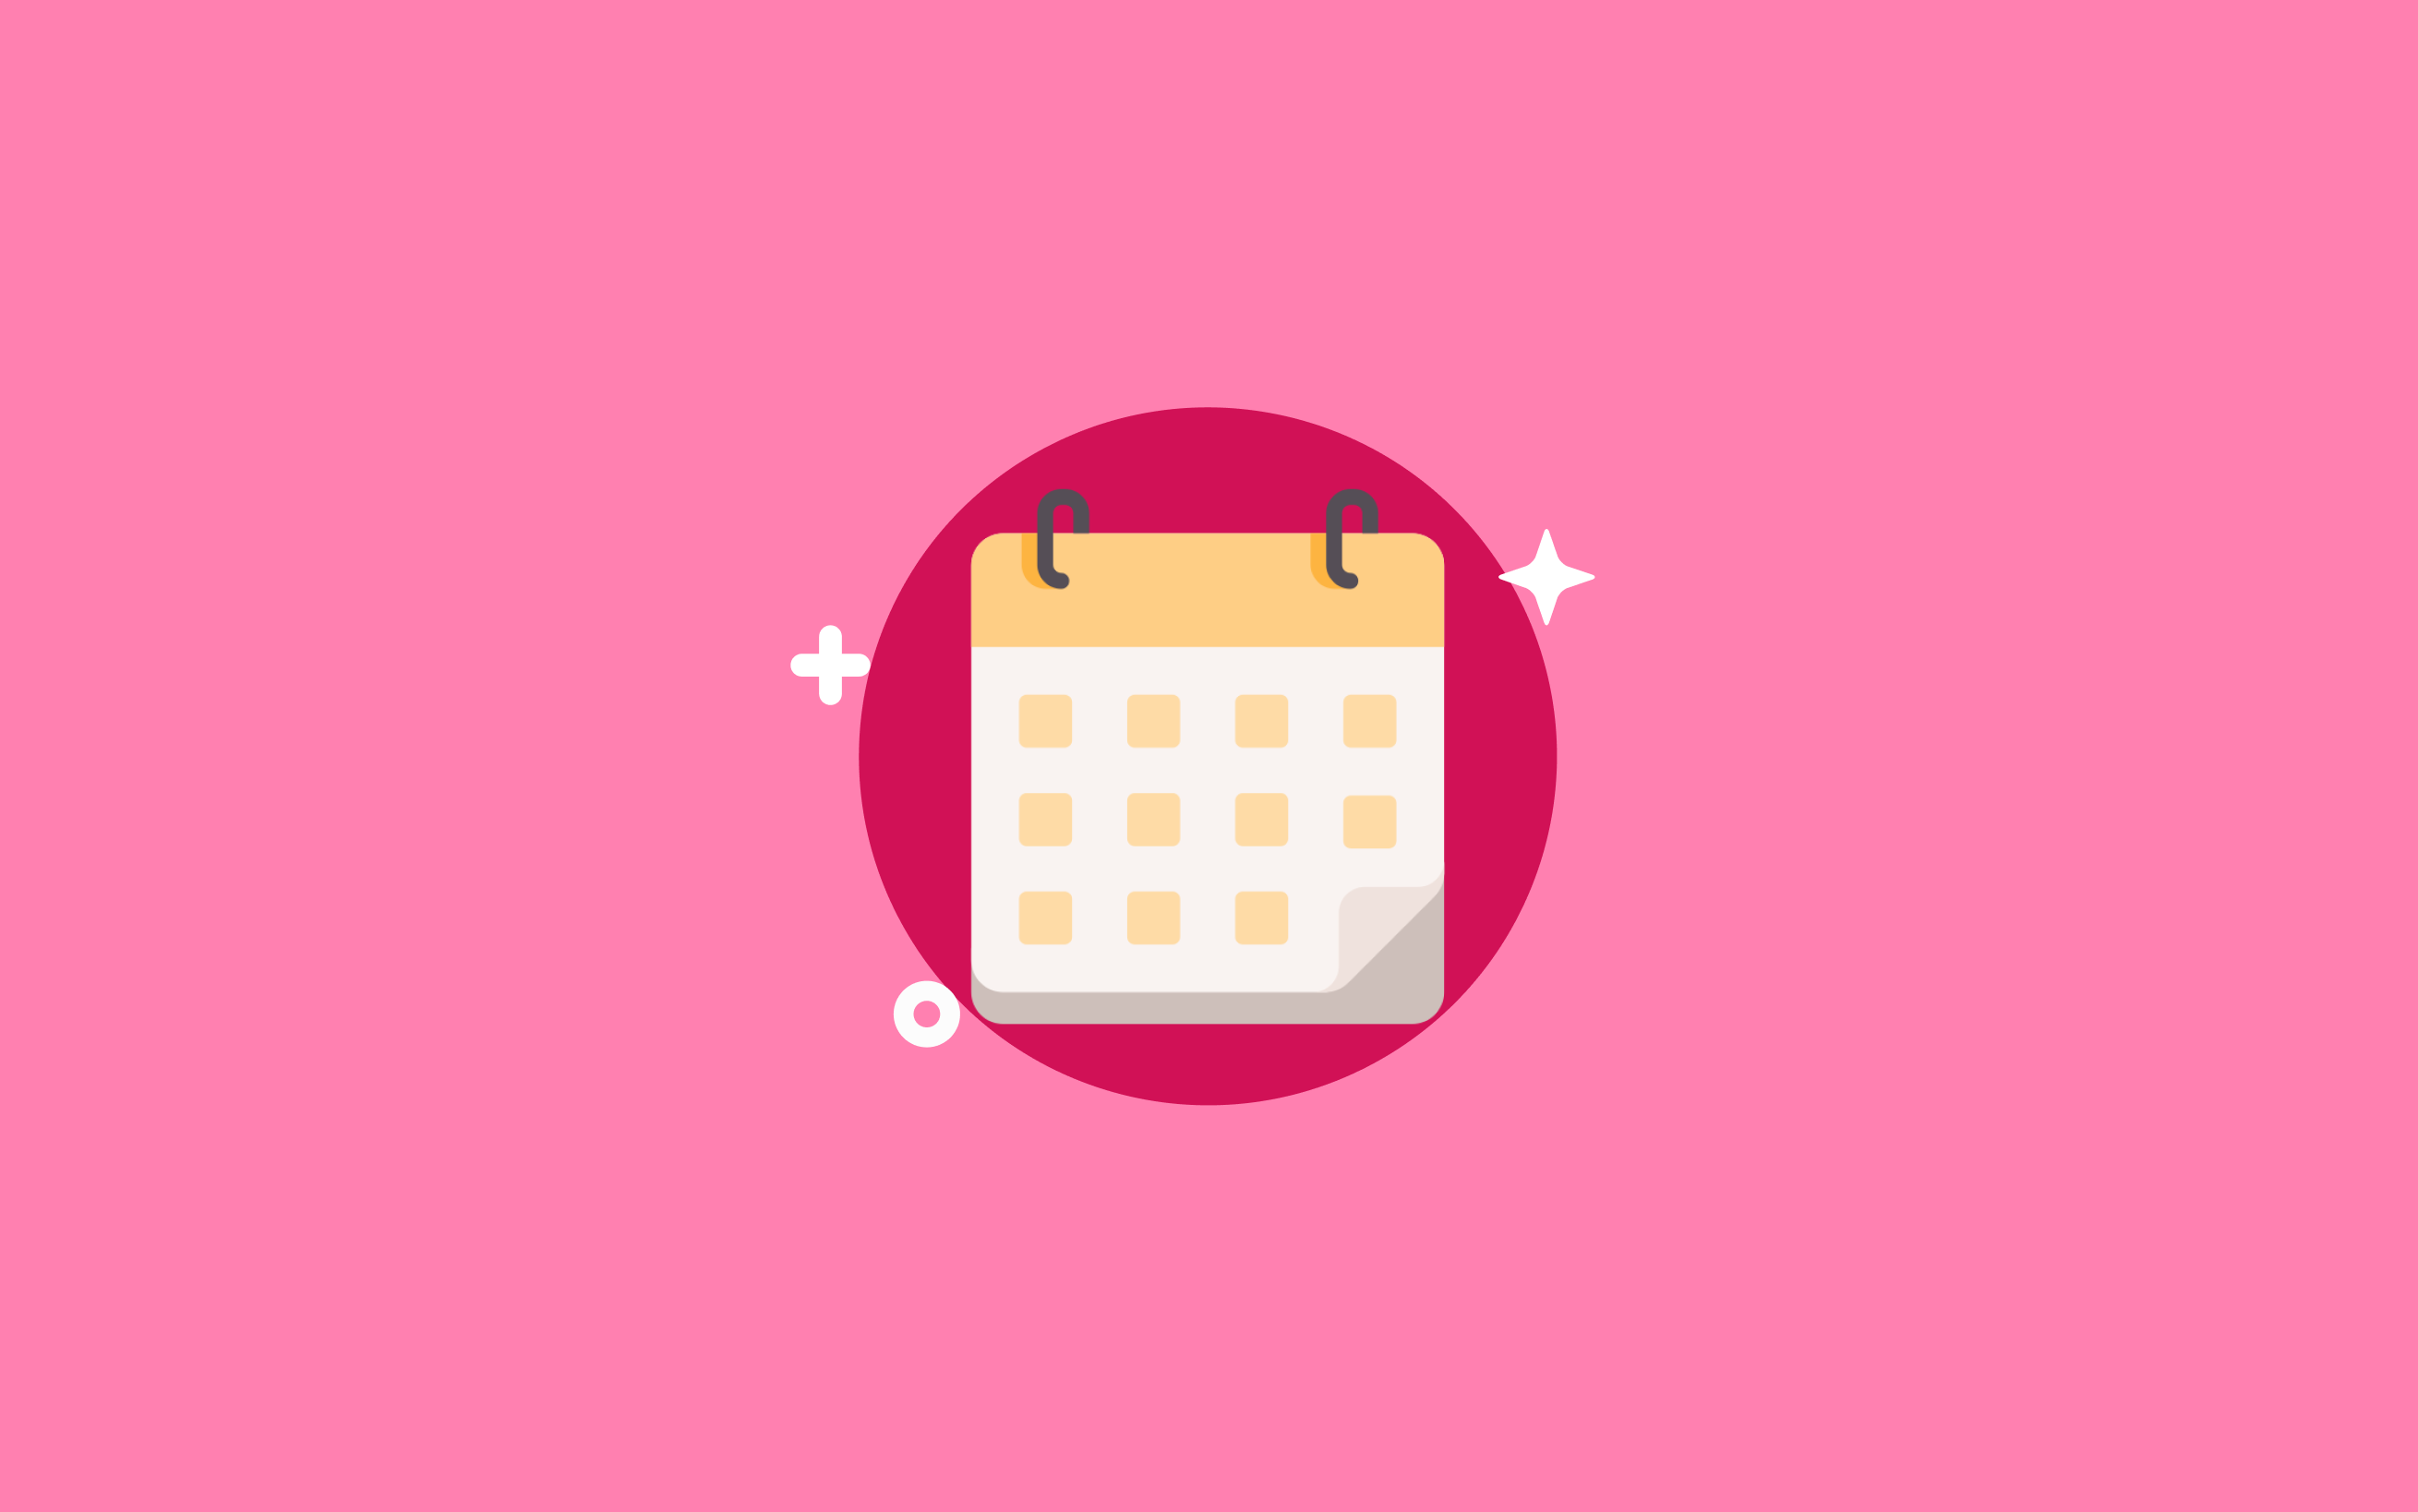 Scale Your Holiday Sales With the Ultimate BFCM Calendar